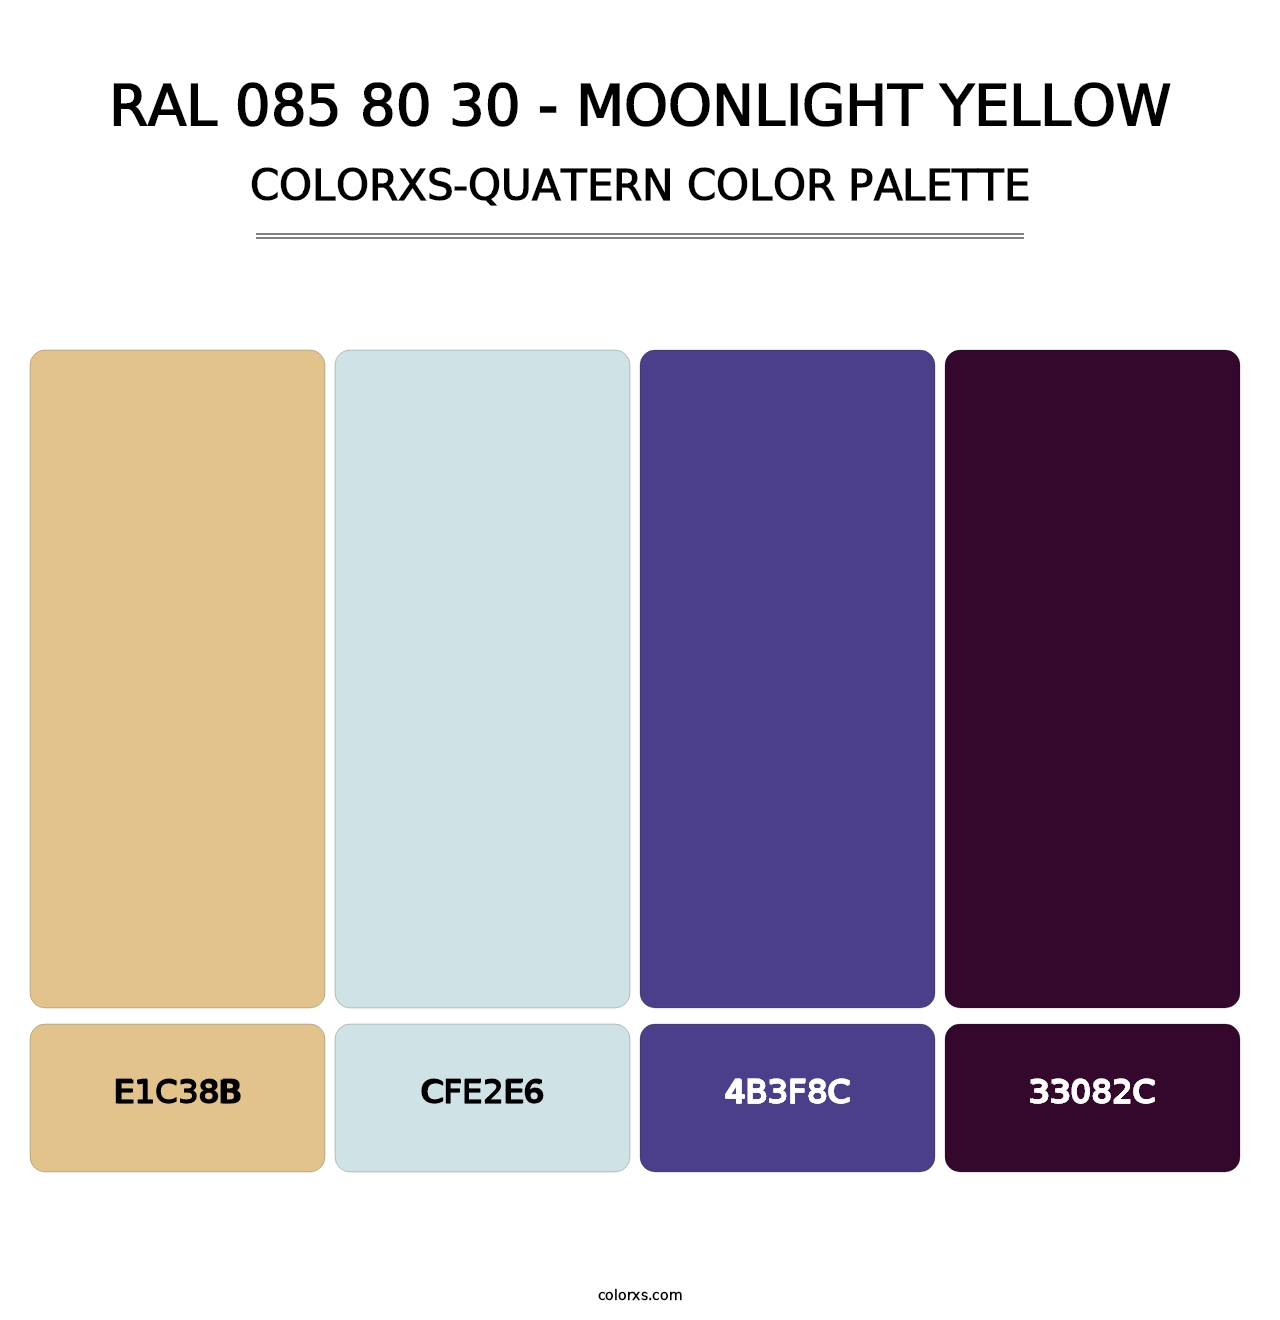 RAL 085 80 30 - Moonlight Yellow - Colorxs Quatern Palette